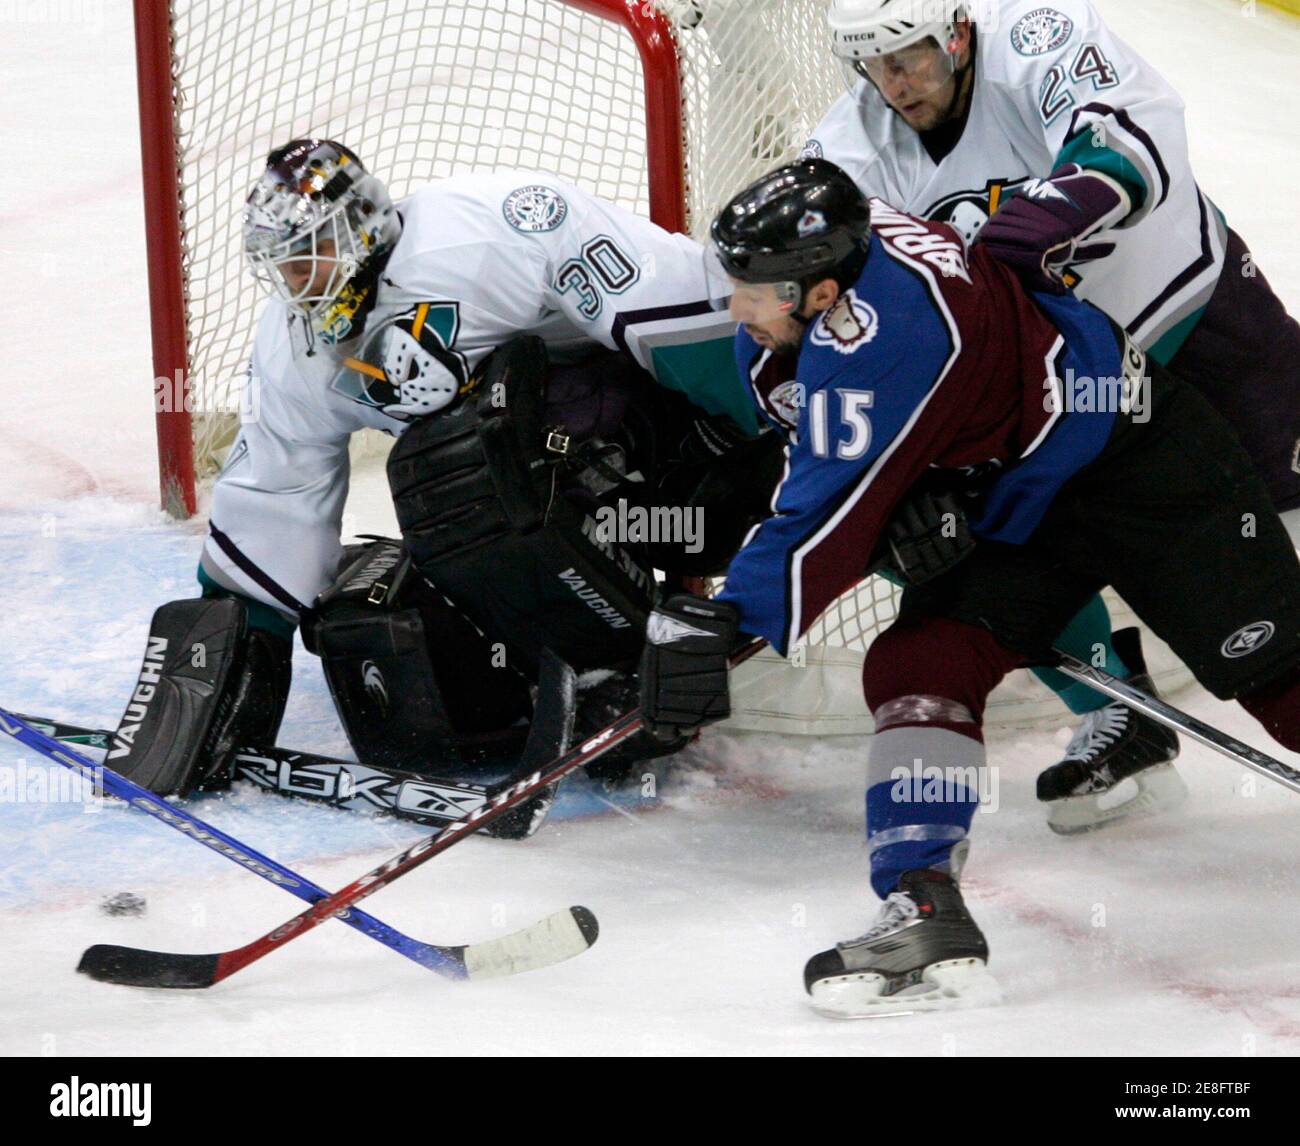 Colorado Avalanche winger Andrew Brunette (15) sets up the puck in front of Anaheim Mighty Ducks goalie Ilya Bryzgalov (L) at the end of the first period of the NHL semi-final playoff game in Denver May 9, 2006. Colorado's Dan Hinote scored on the play. Defending for the Ducks is Ruslan Salei (24). REUTERS/Rick Wilking Stock Photo